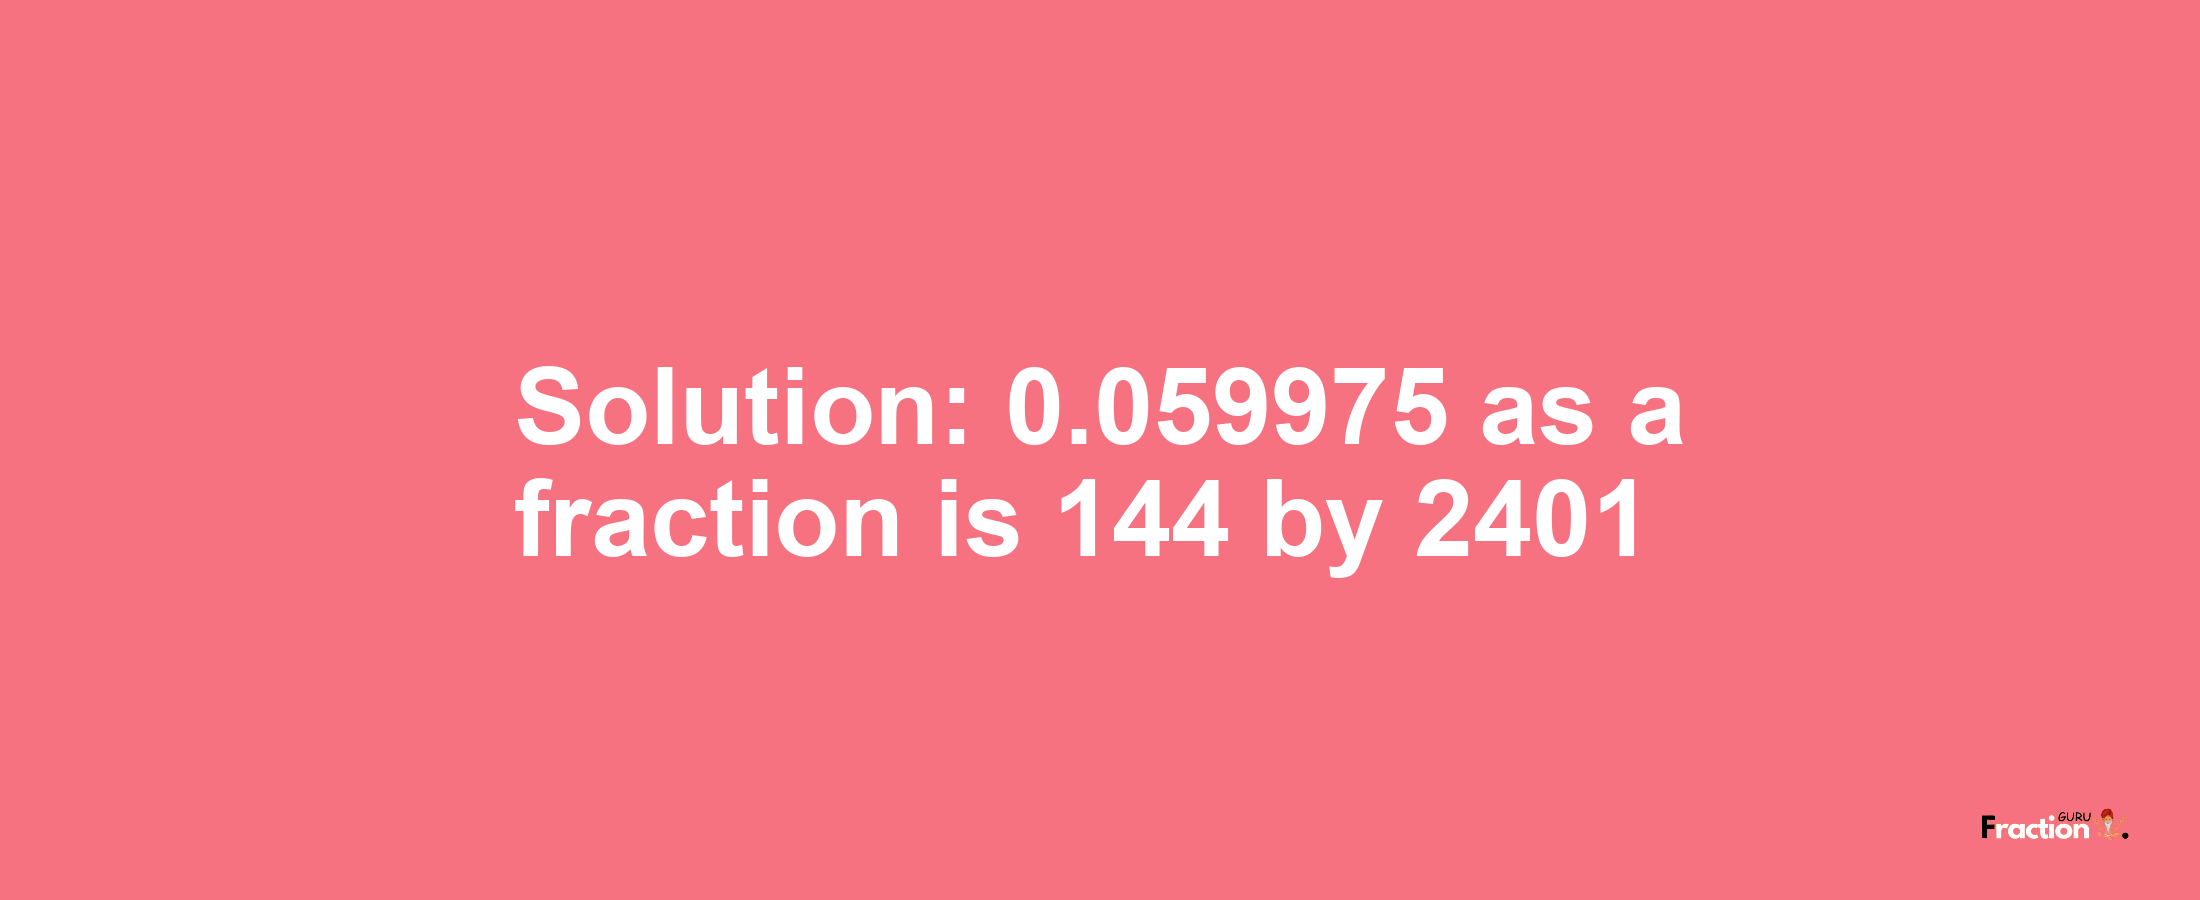 Solution:0.059975 as a fraction is 144/2401